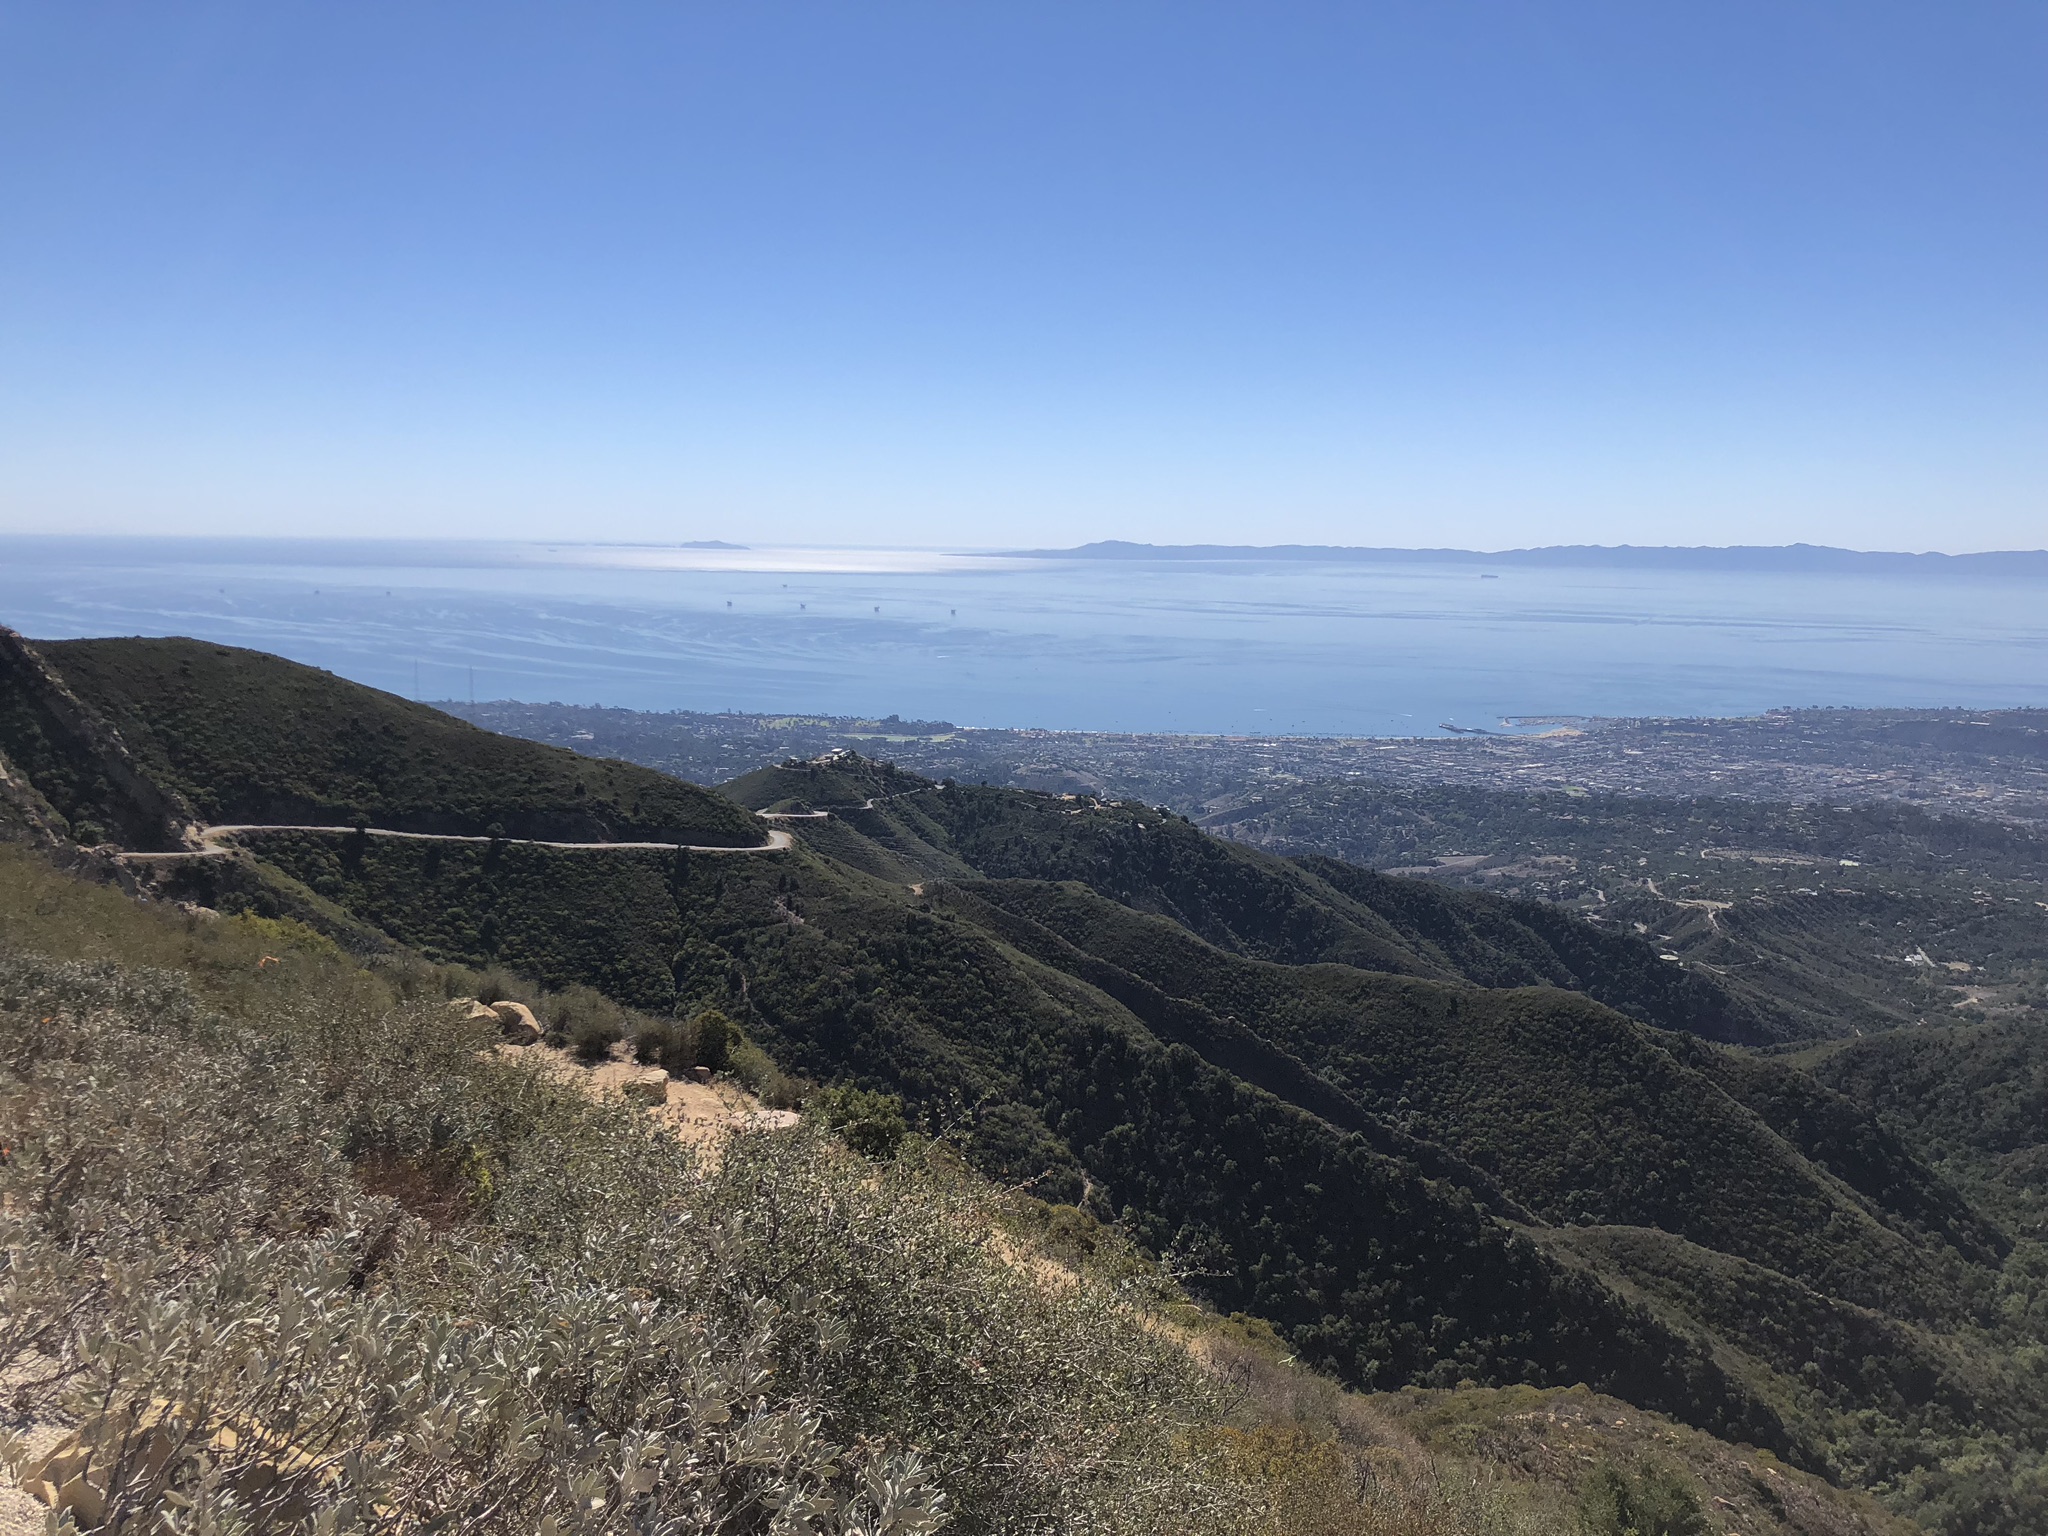 Taking in the views from the Santa Ynez mountains on the Mountains to Shore Bike tour